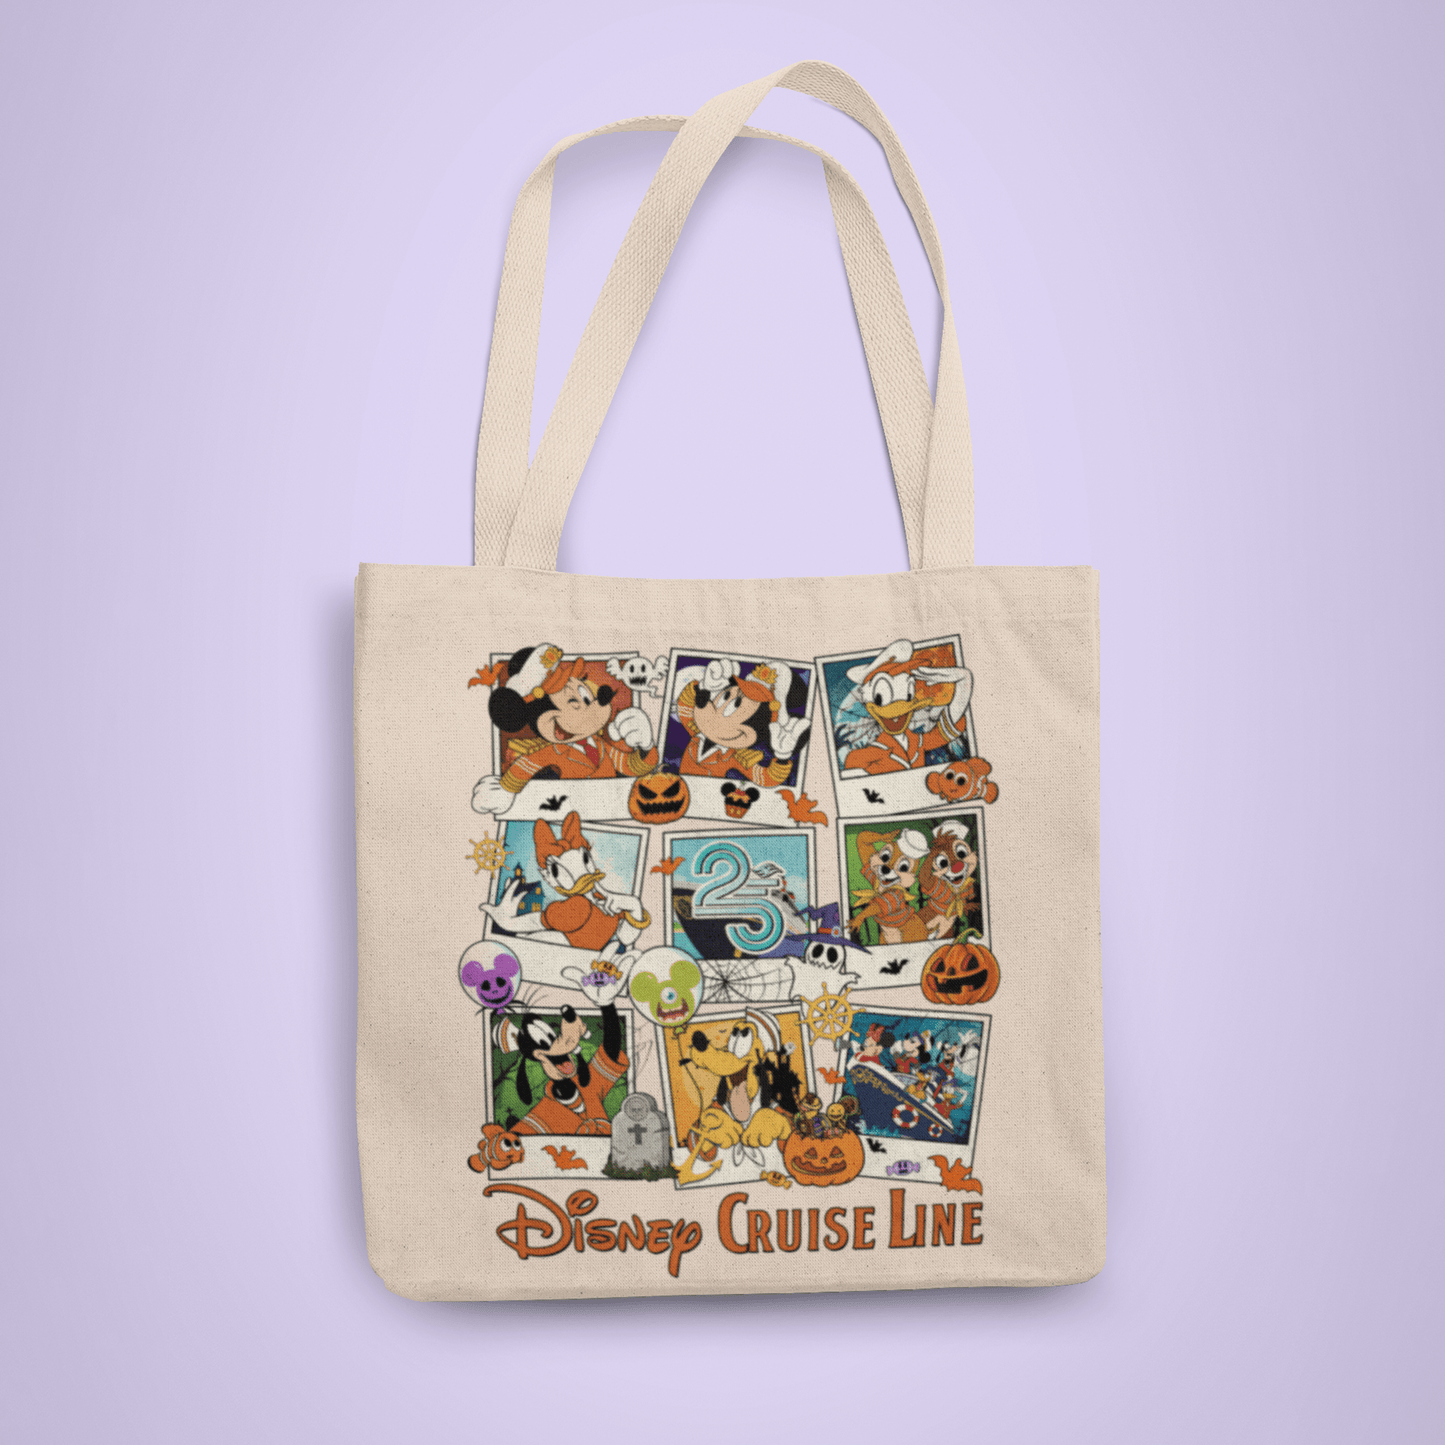 Disney Cruise Line 25th Anniversary Personalized Halloween Trick or Treat Tote Bag - Two Crafty Gays